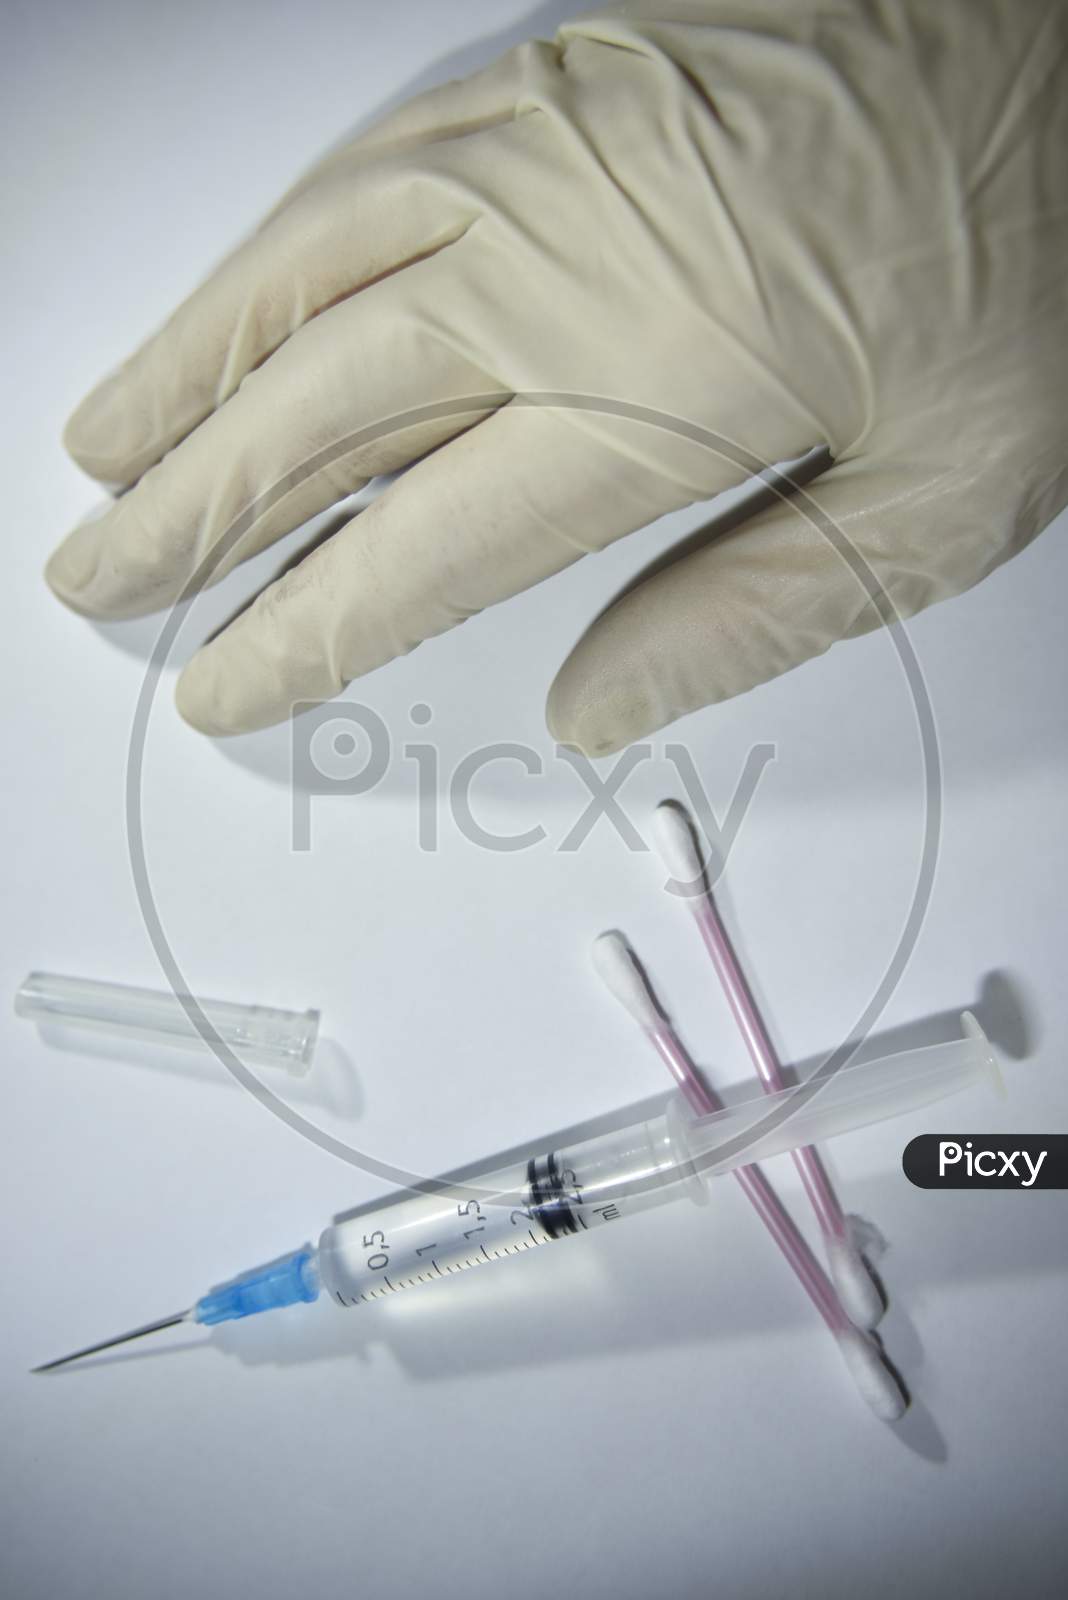 Hand In The Medical Glove And Syringe With Cotton Buds On The White Backgrouns. Medical Issues Concept.